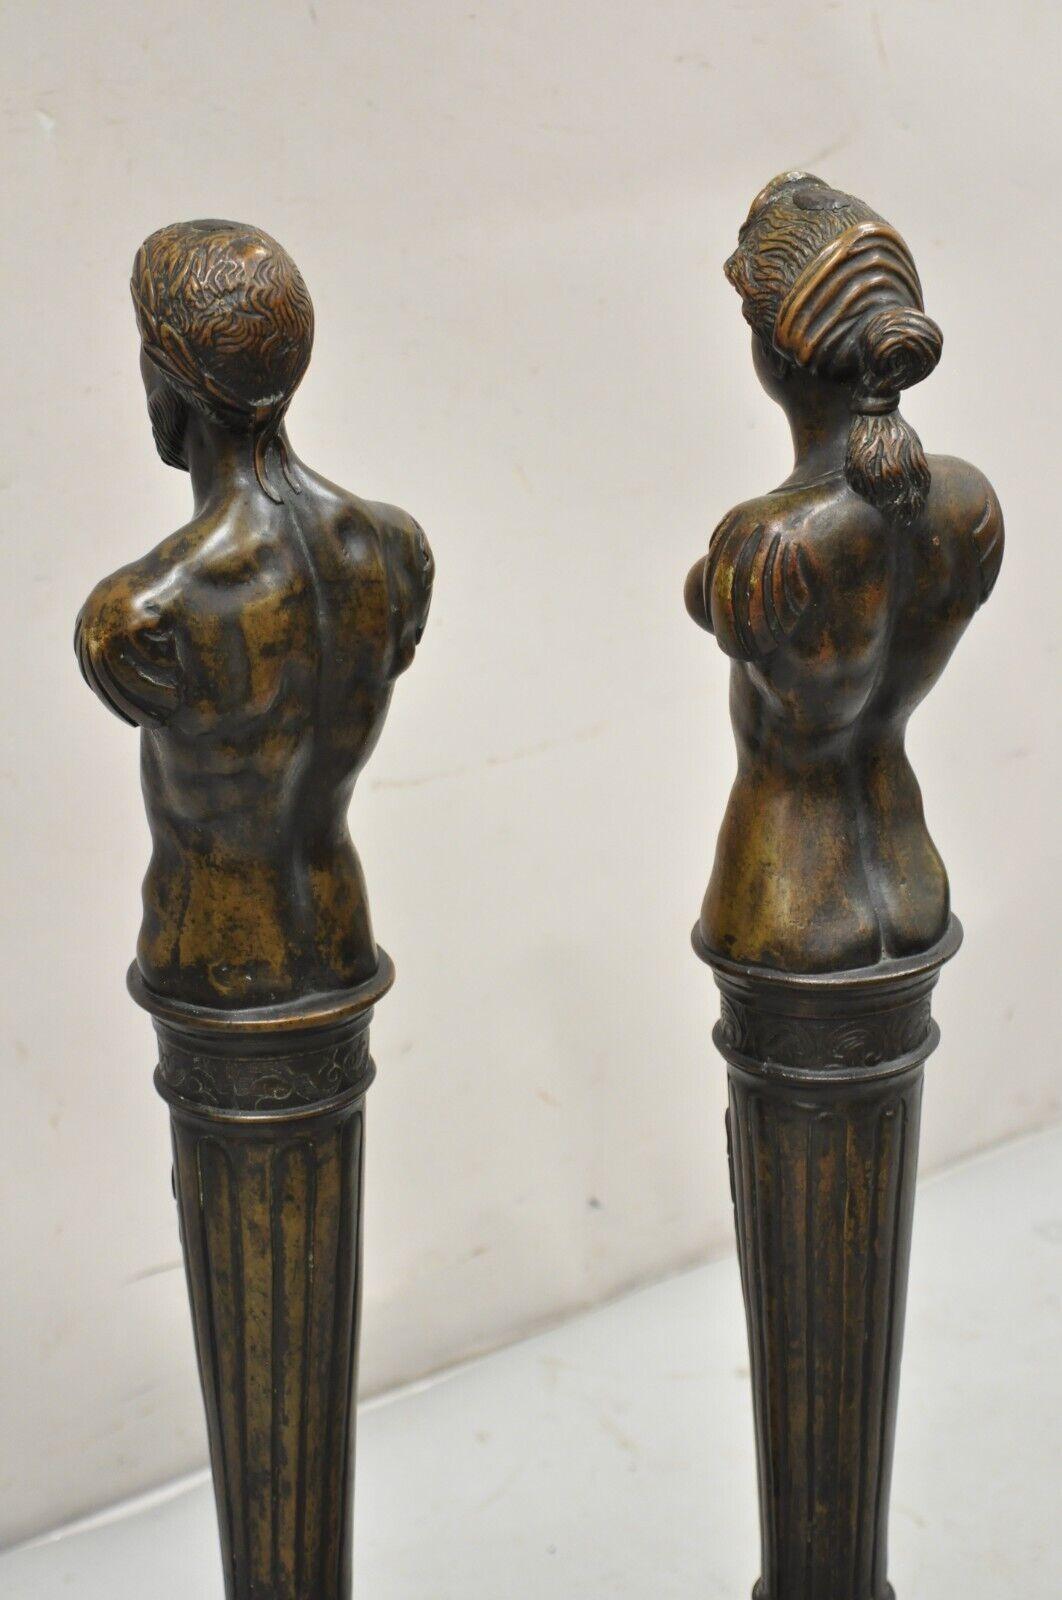 Antique French Renaissance Revival Large Figural Man and Woman Andirons - a Pair For Sale 5